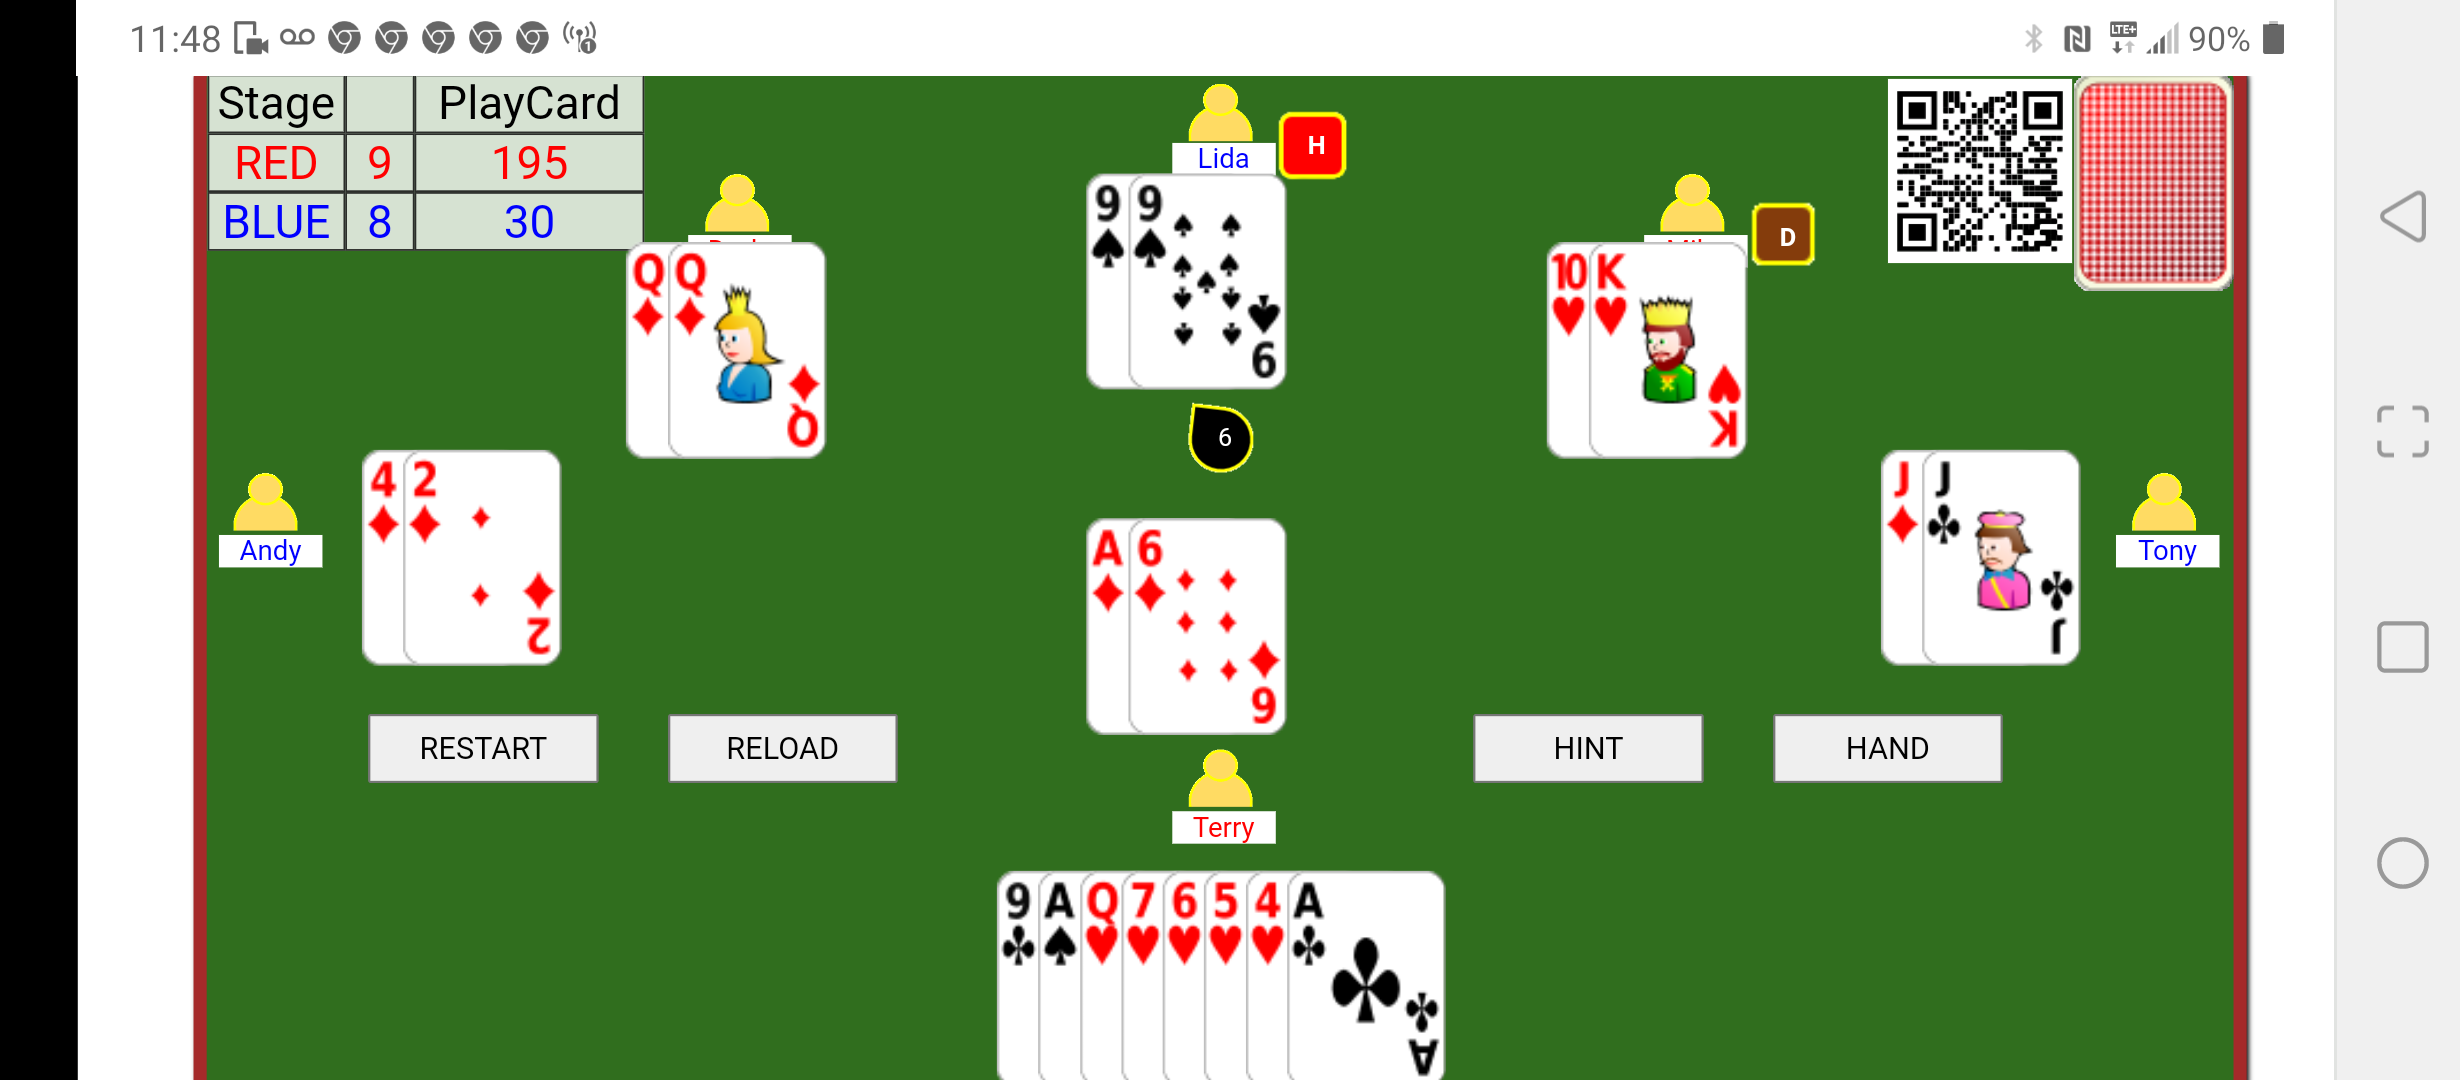 html5 tractor card game Screenshot_20220120-1148121.png